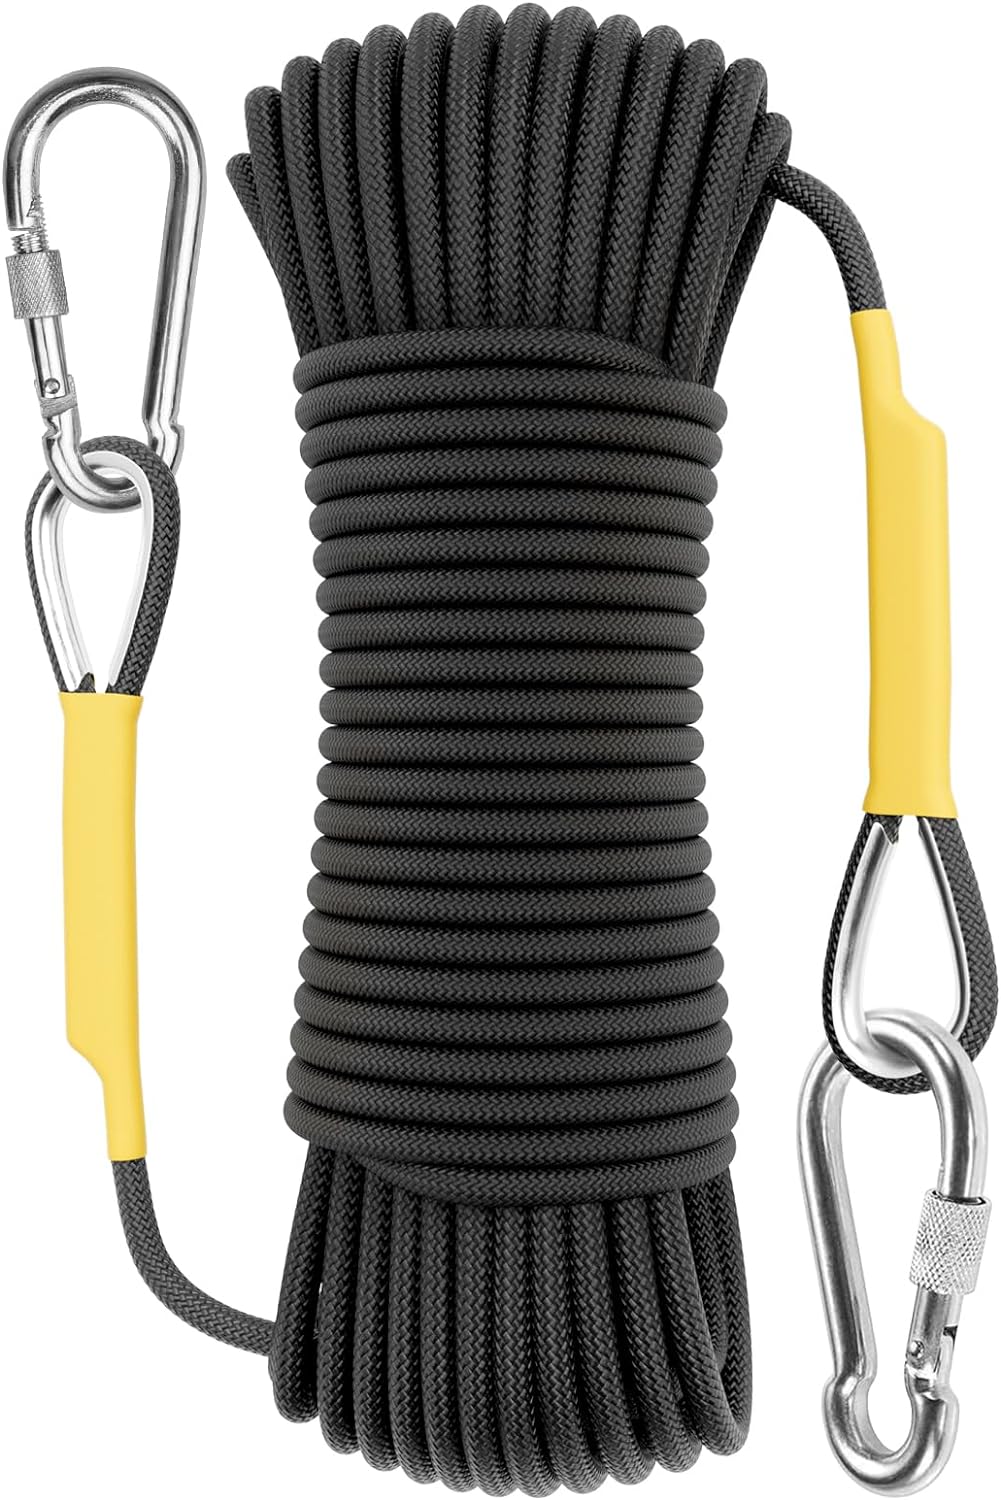 X XBEN Outdoor Climbing Rope 10M(32ft) 20M(64ft) 30M(96ft) 50M(160ft) 70M(230ft) 152M(500FT) 352M(1000FT) Static Rock Climbing Rope for Escape Rope Ice Climbing Equipment Fire Rescue Parachute